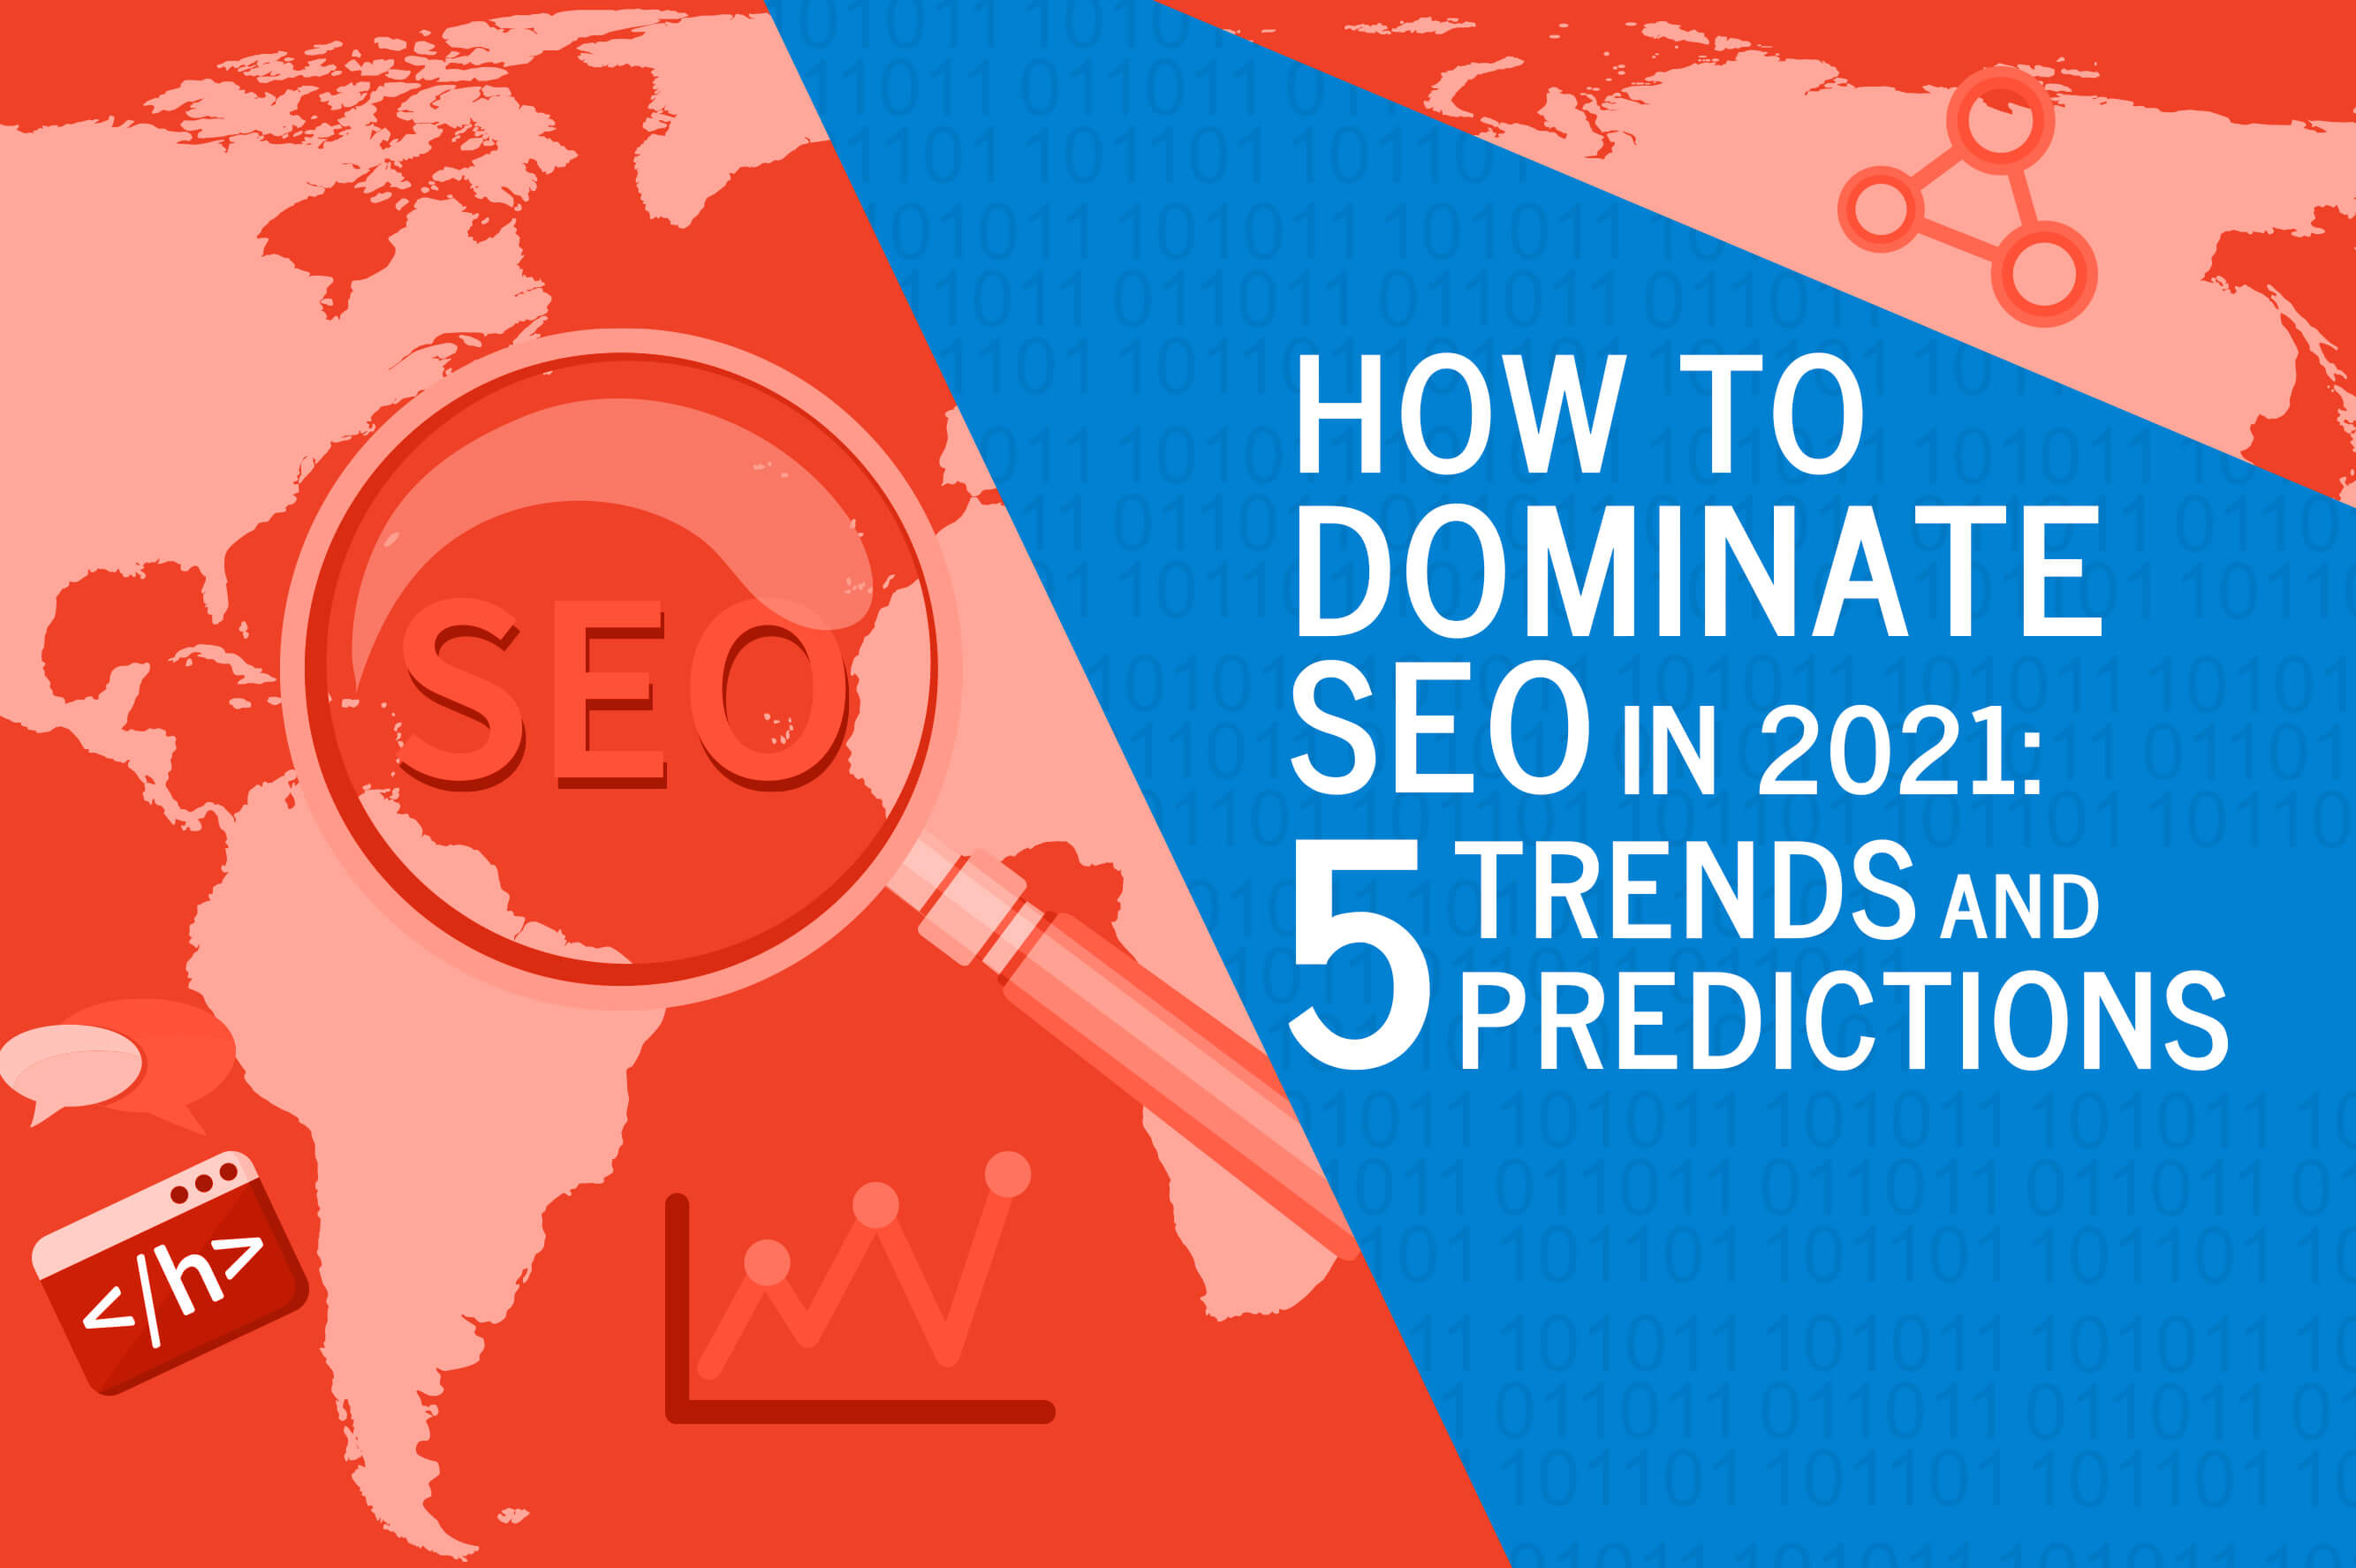 How to Dominate SEO in 2021 5 Trends and Predictions